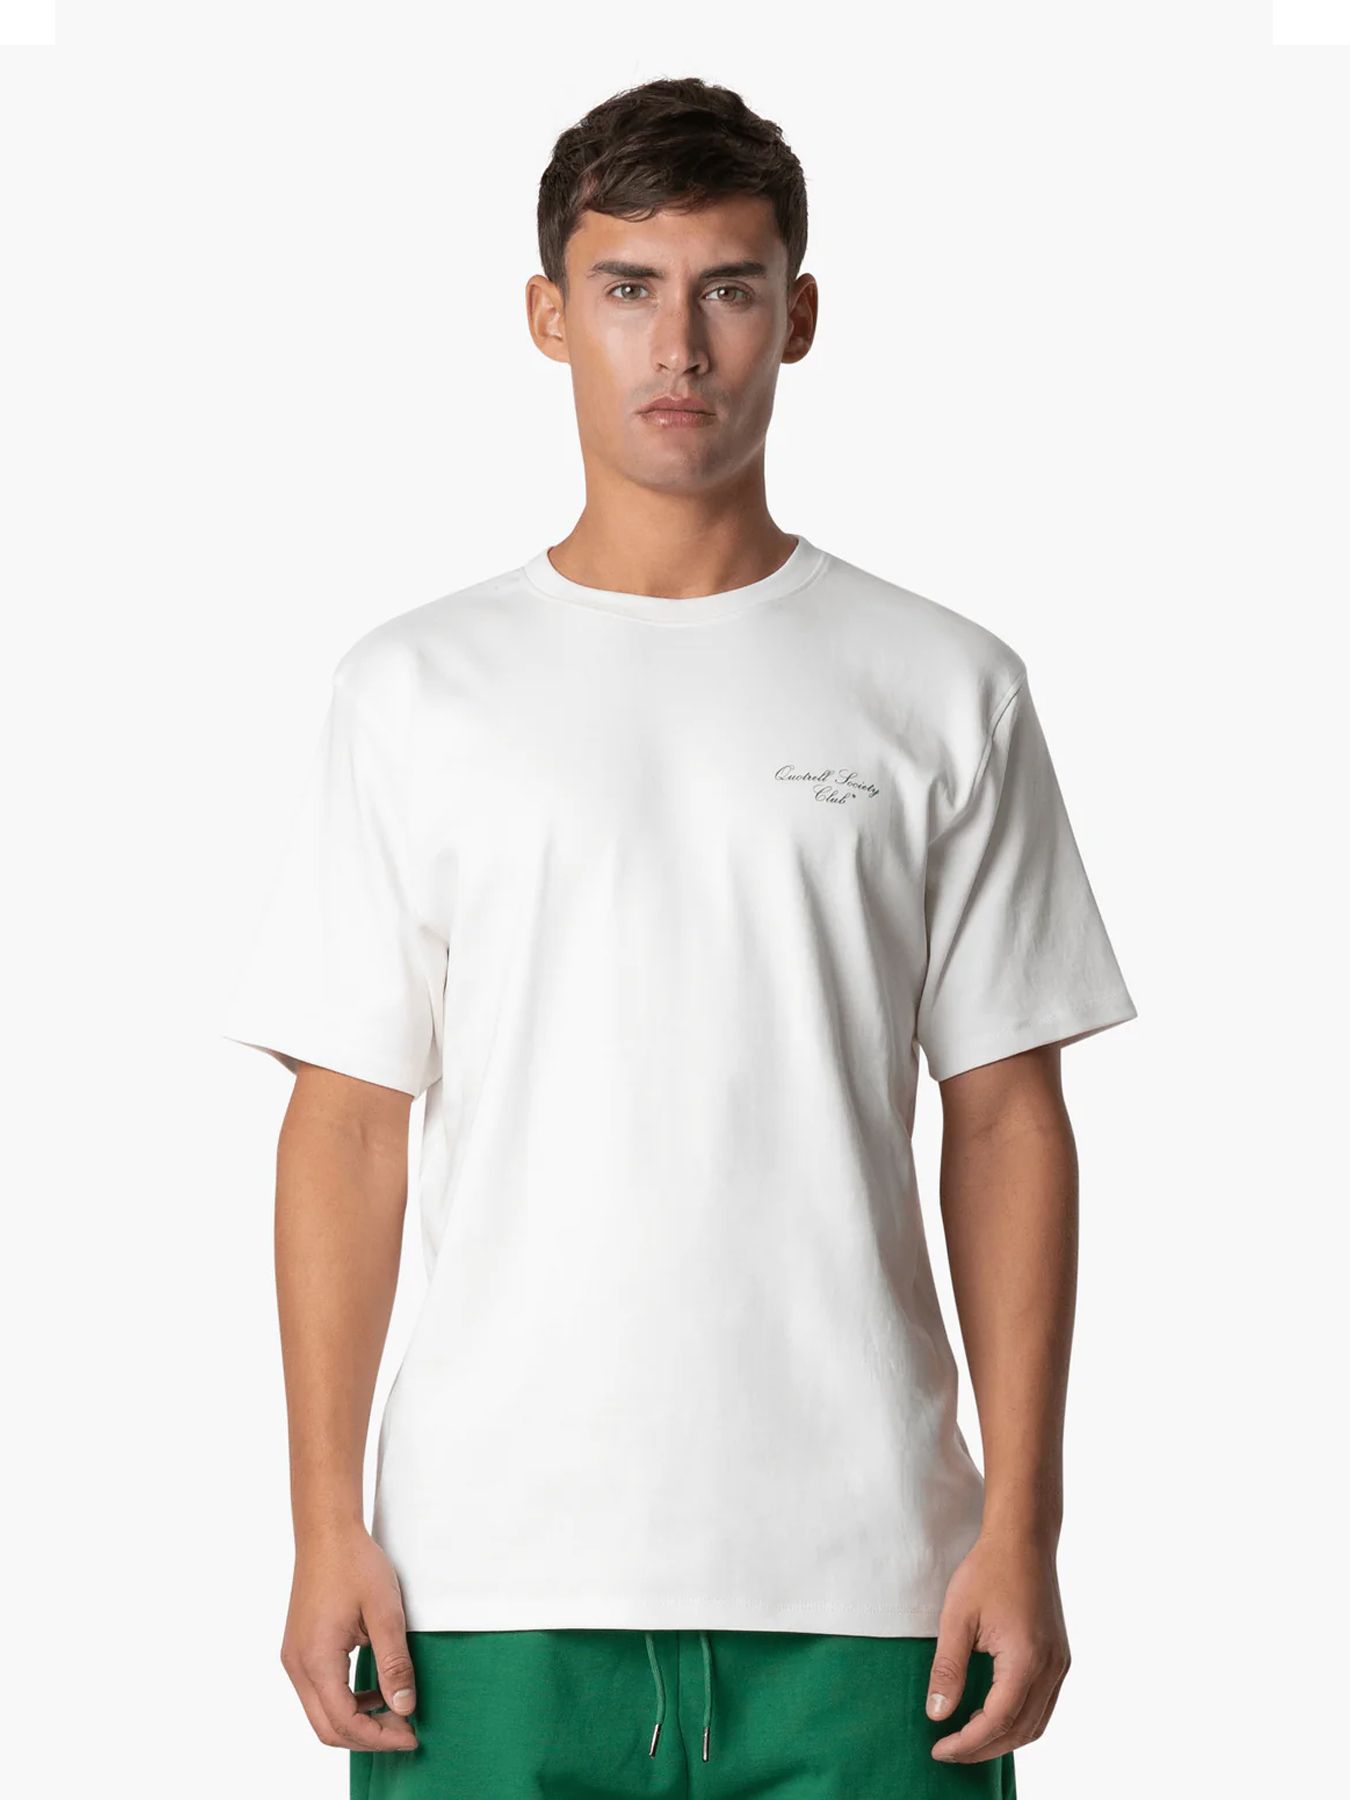 Quotrell Society club t-shirt Off White/green 00108489-OWG